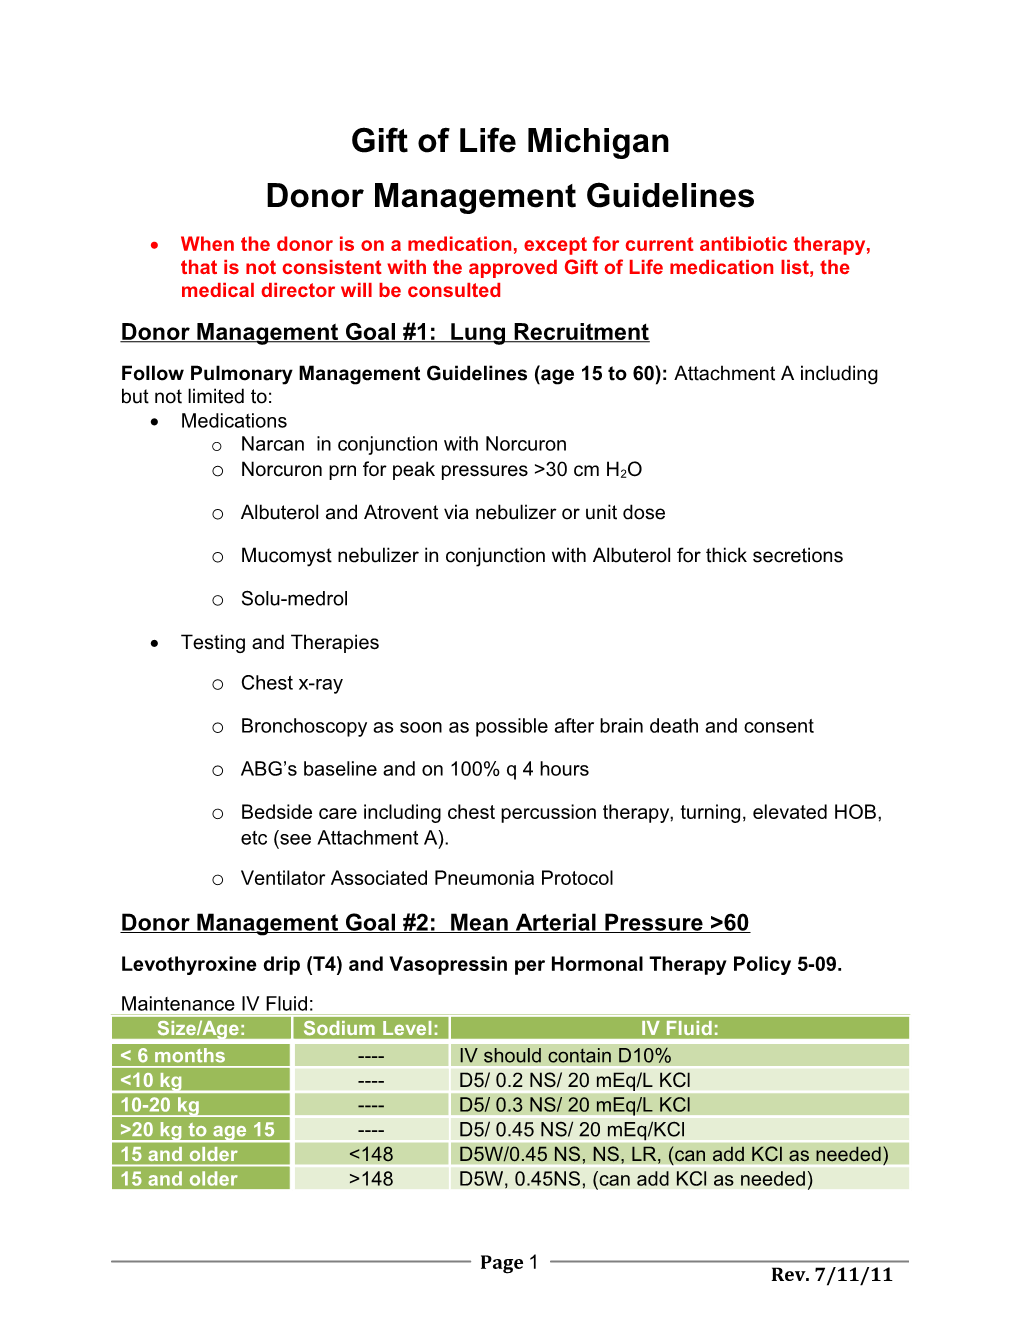 Donor Management Guidelines 7-11-11 from Gift of Life Michigan